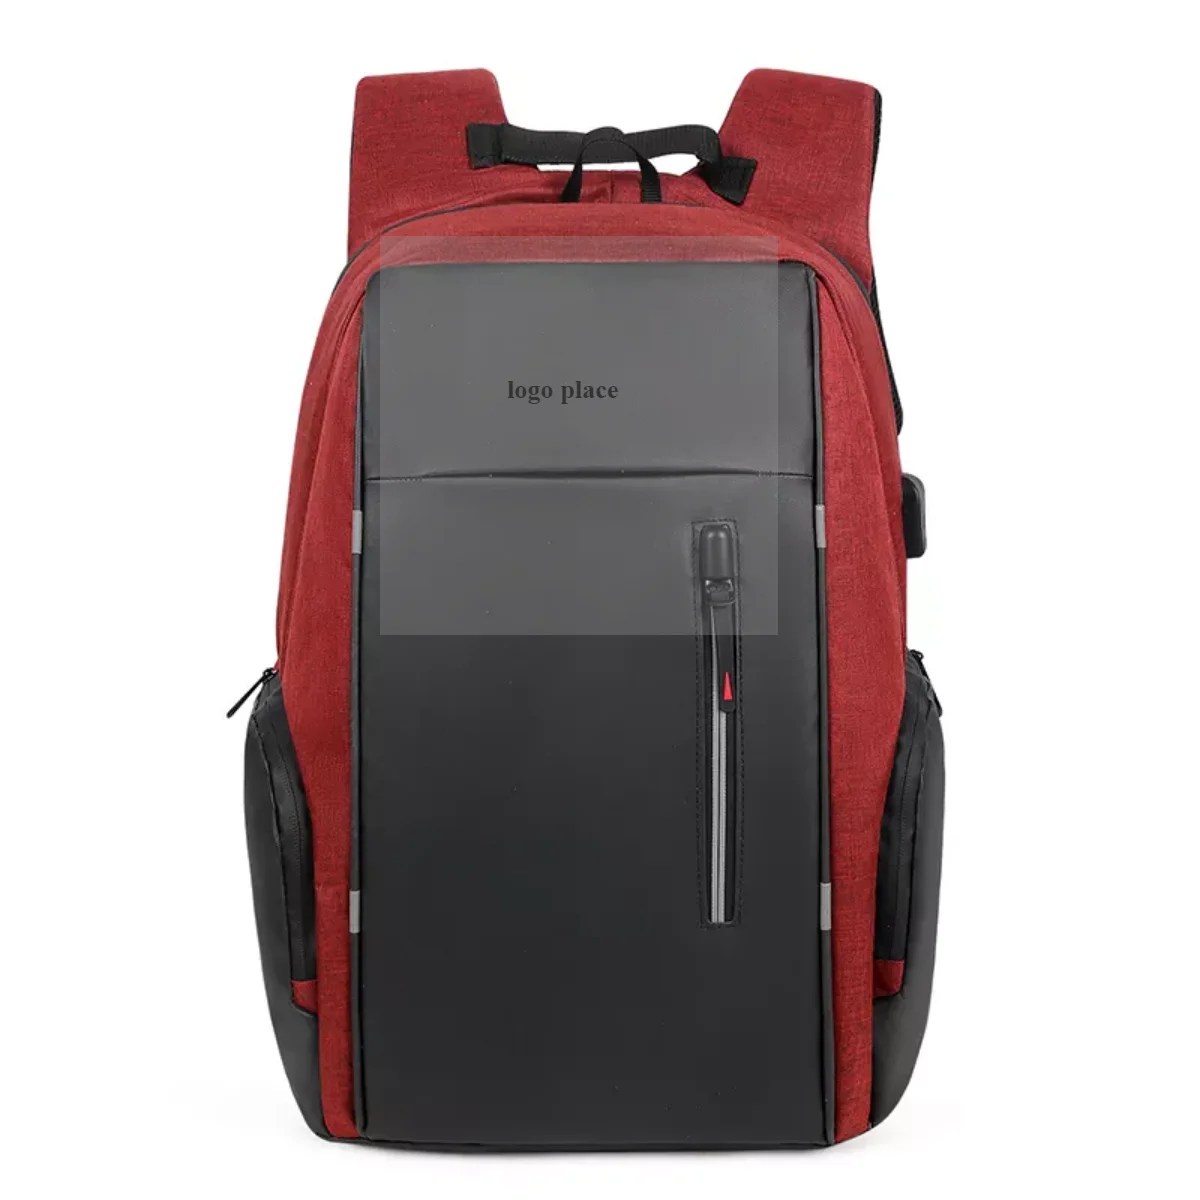 Fashion Backpack multifunction USB charging backpack travel Bags